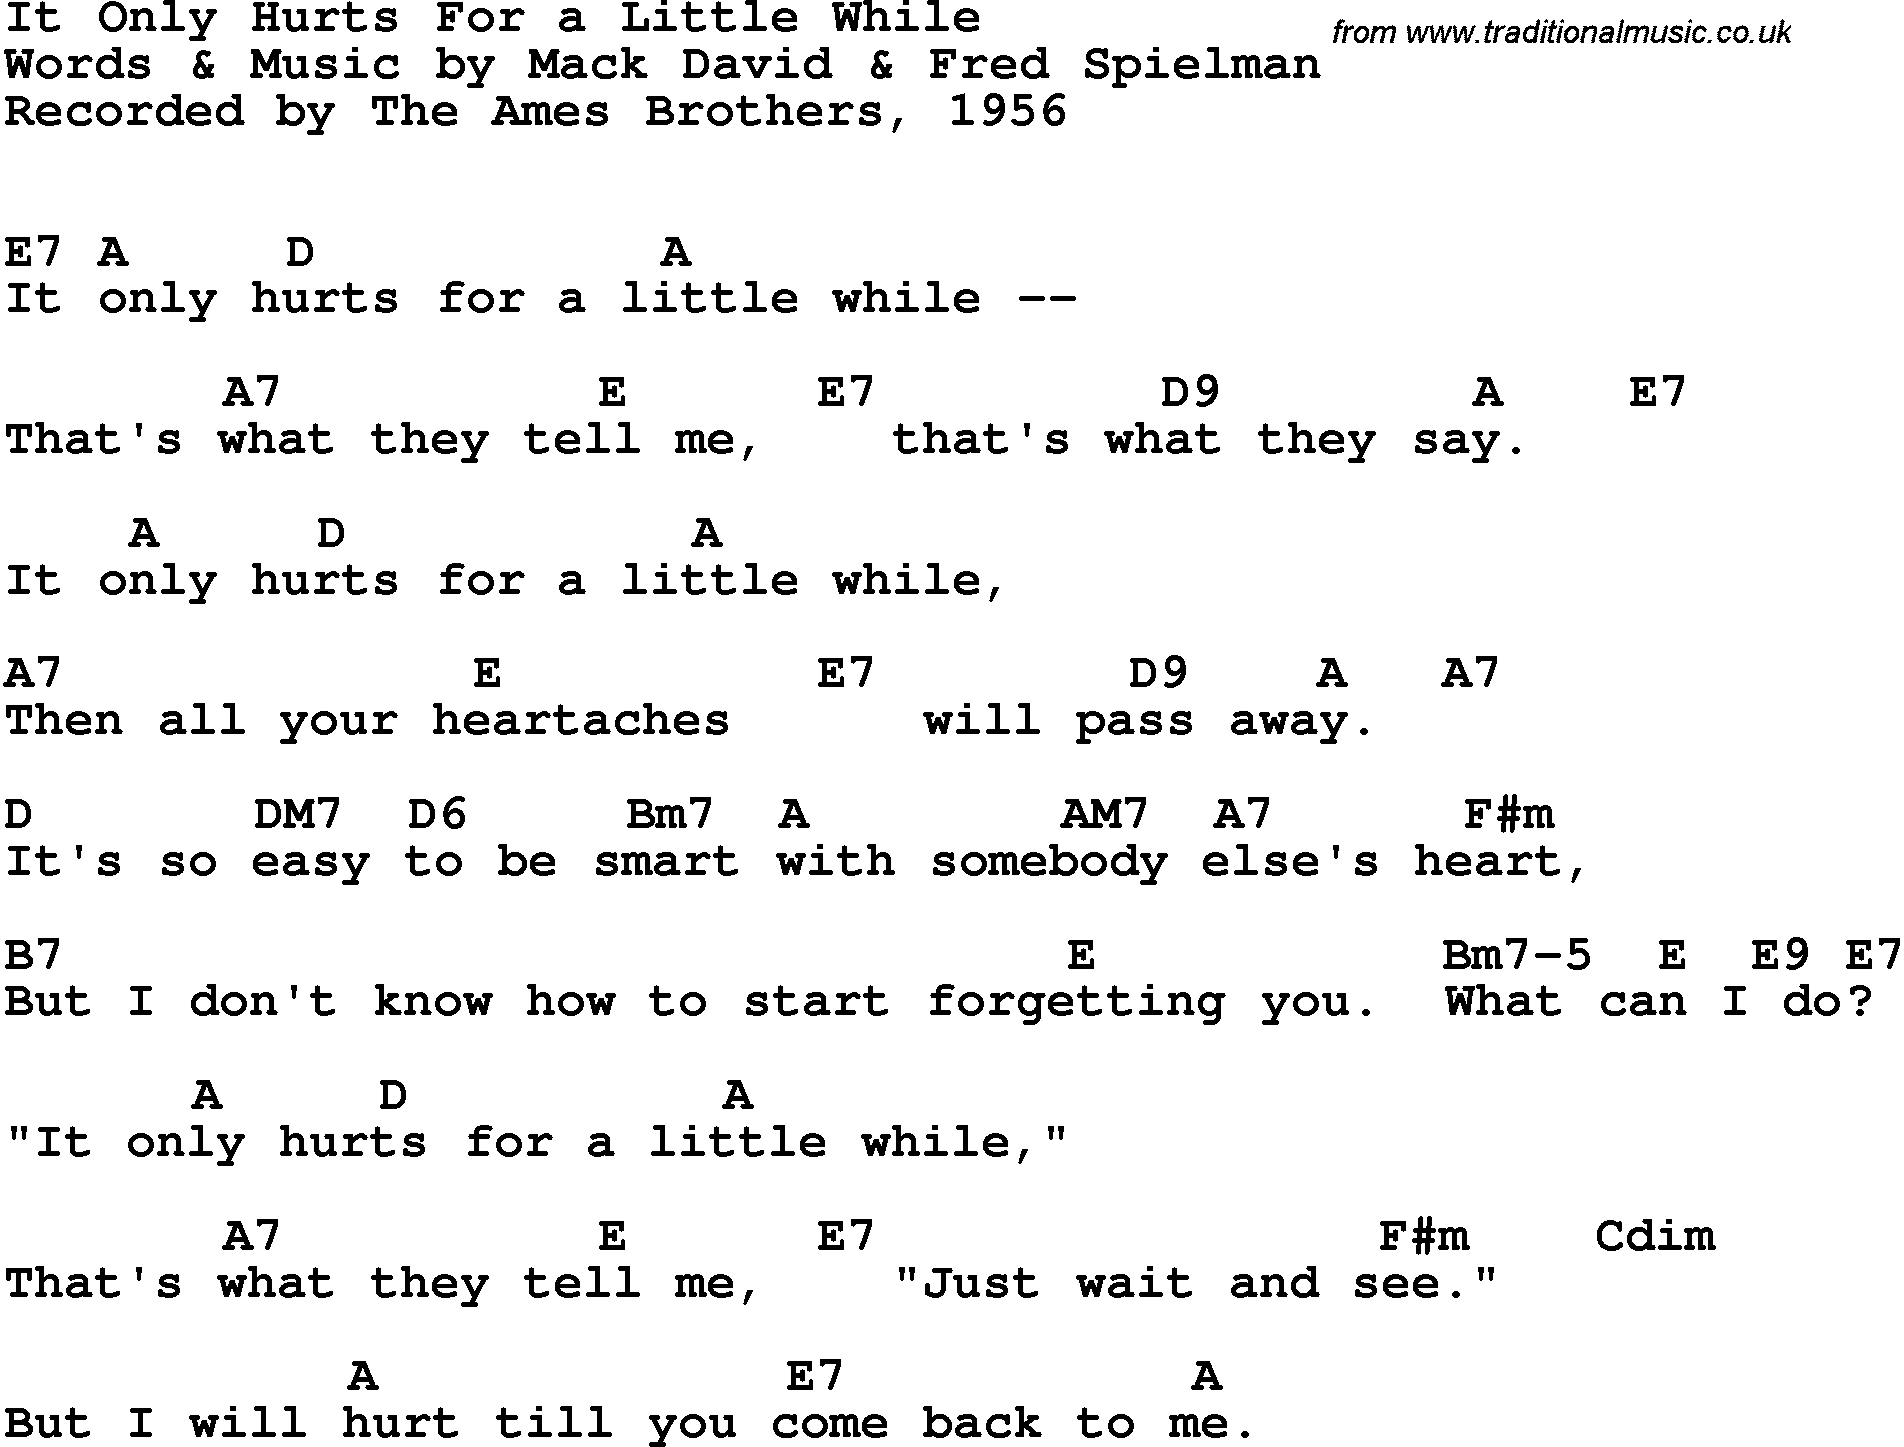 Song Lyrics with guitar chords for It Only Hurts For A Little While  - The Ames Brothers, 1956